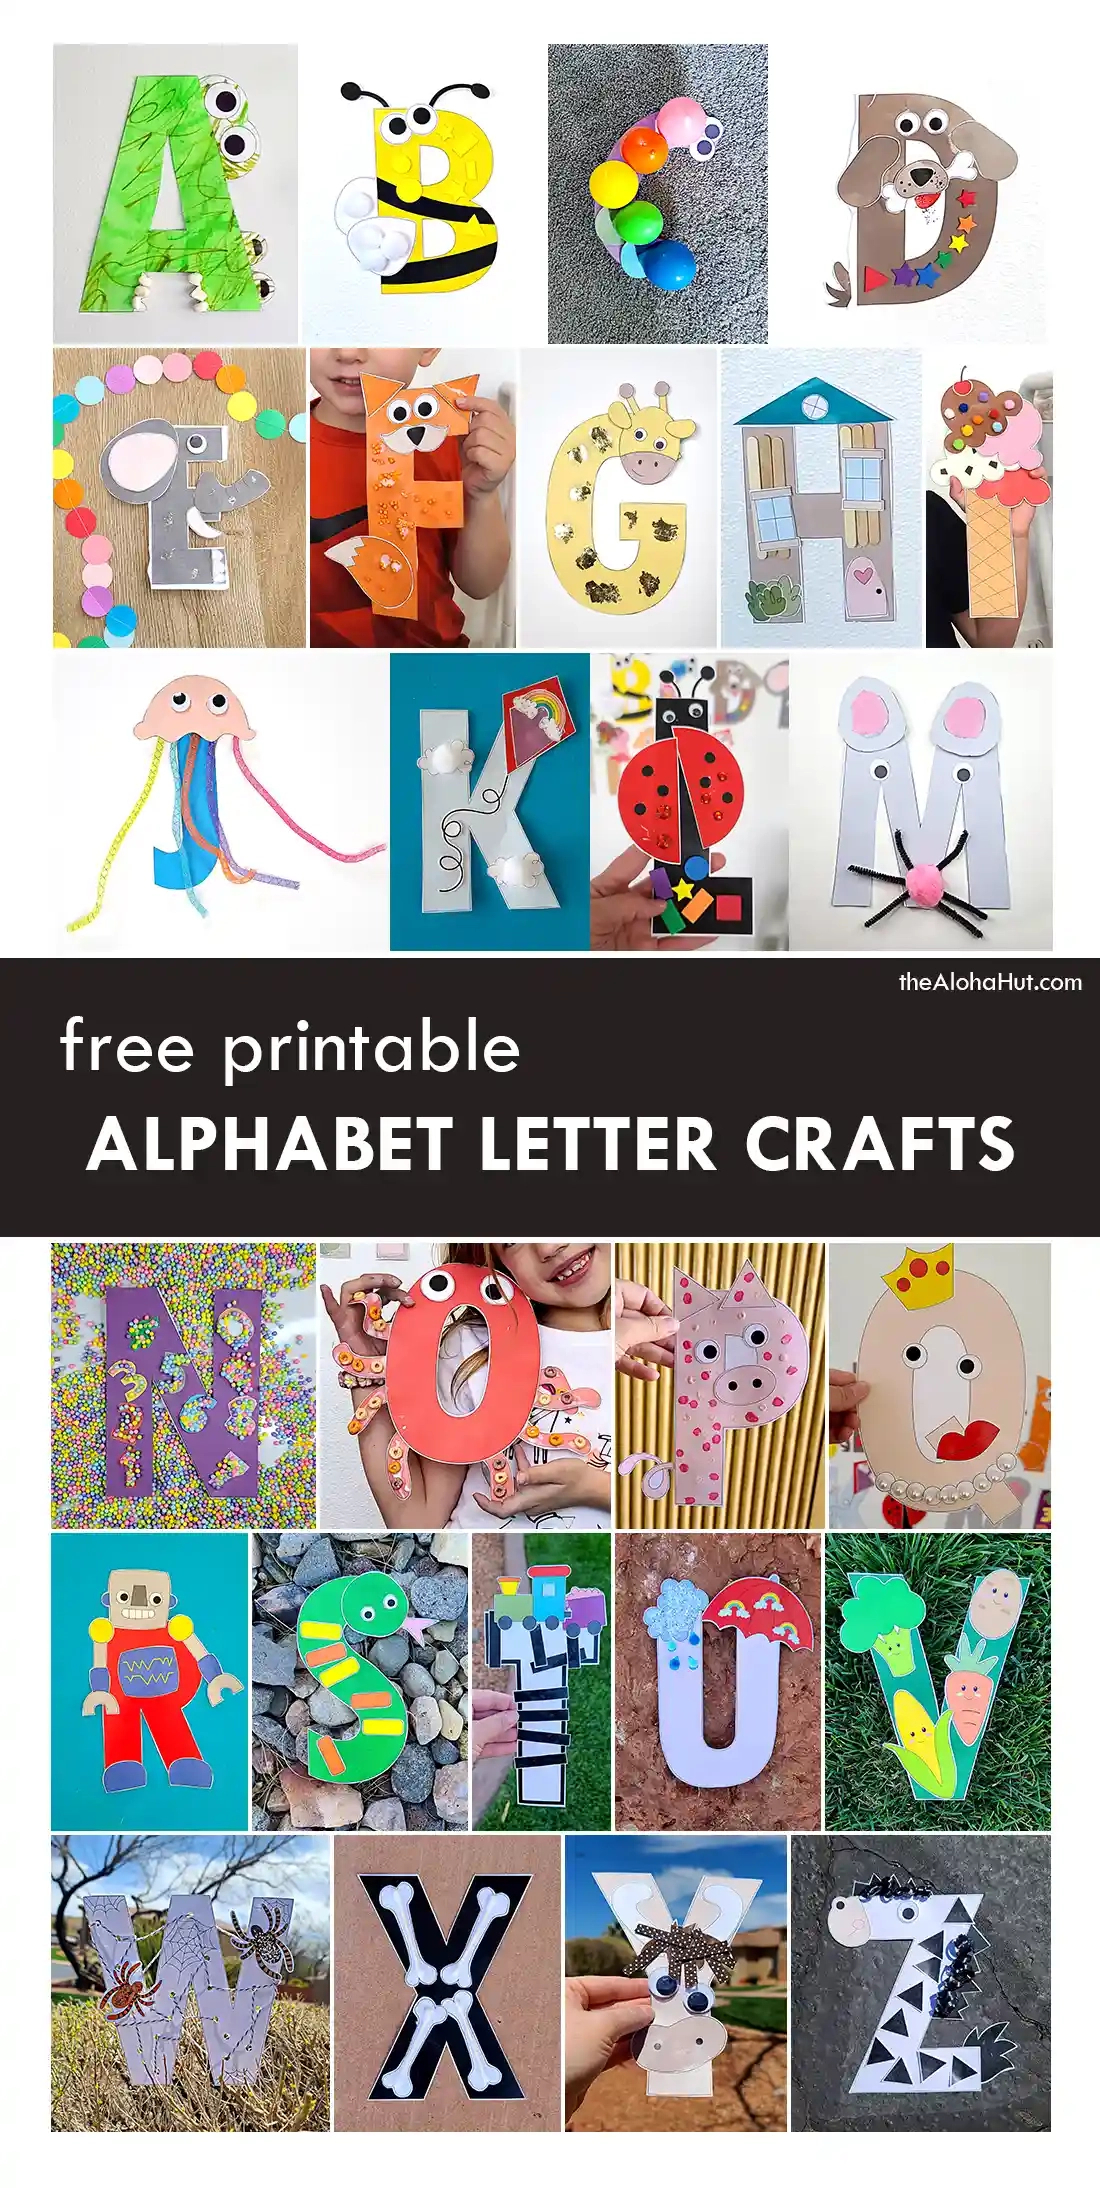 Alphabet Letter Crafts – A To Z - The Aloha Hut - Free Printable Alphabet Letters For Crafts